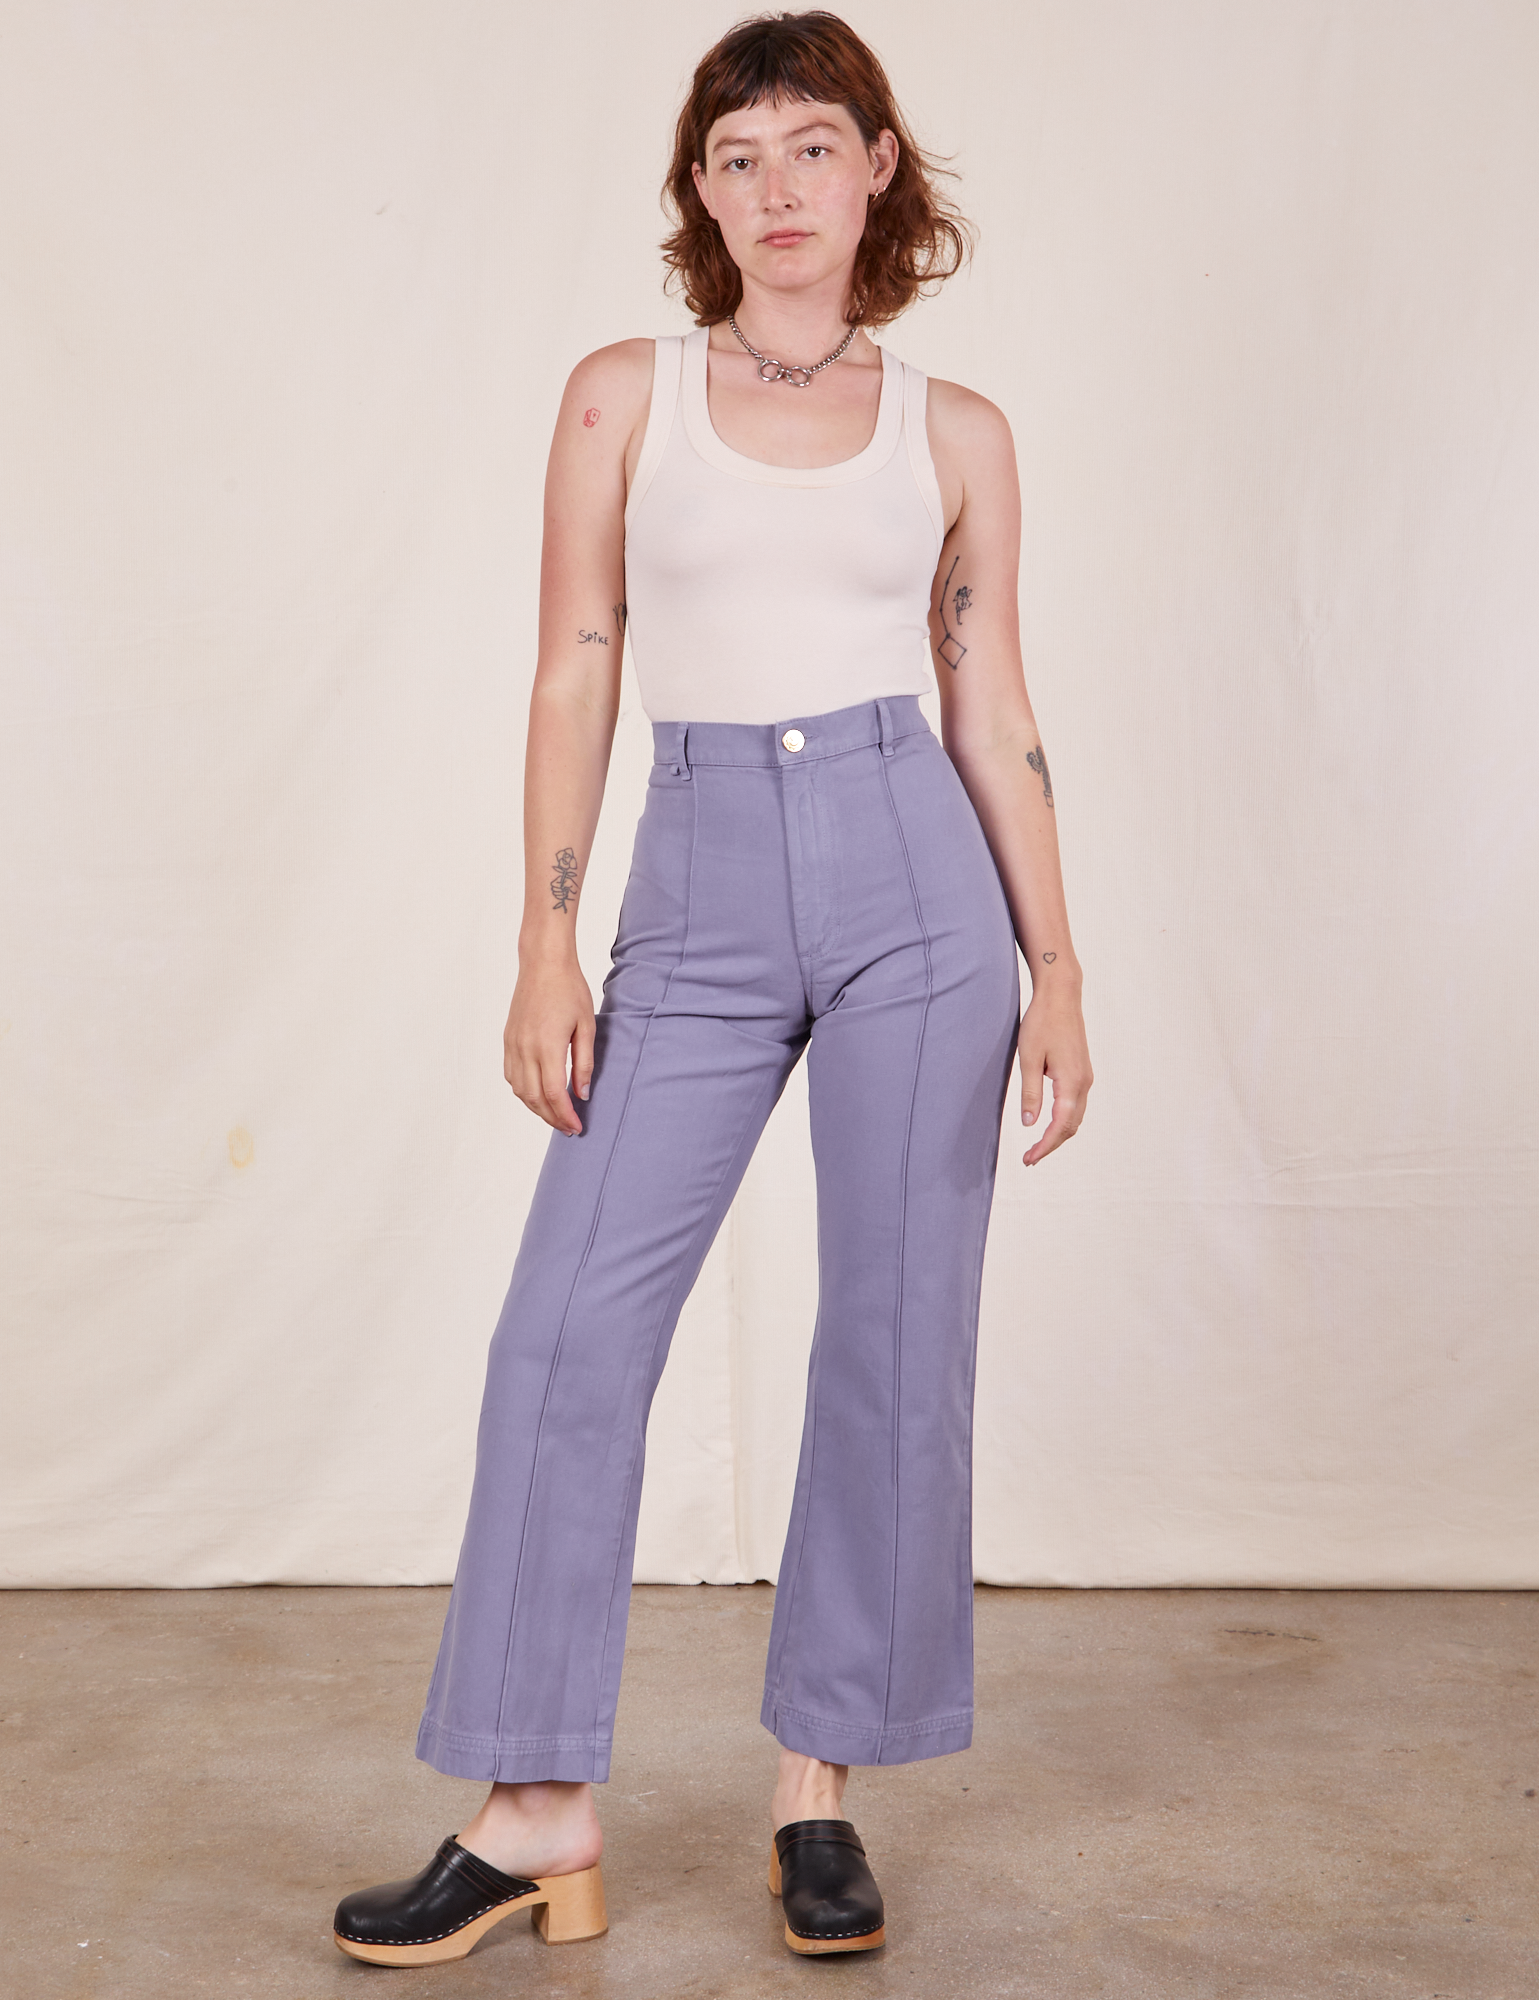 Alex is 5&#39;8&quot; and wearing XS Western Pants in Faded Grape paired with vTank Top in intage tee off-white